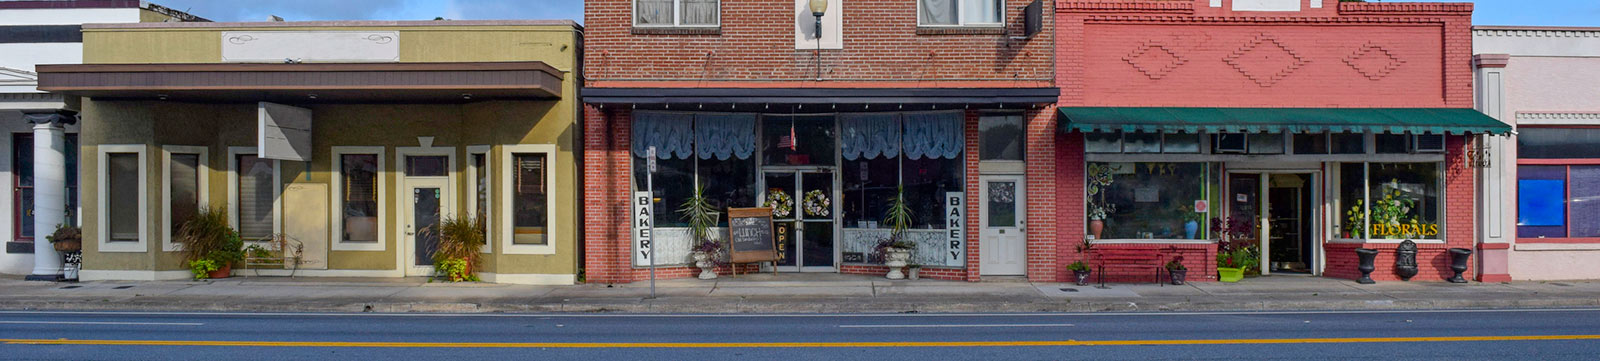 Storefronts of small businesses in a small town